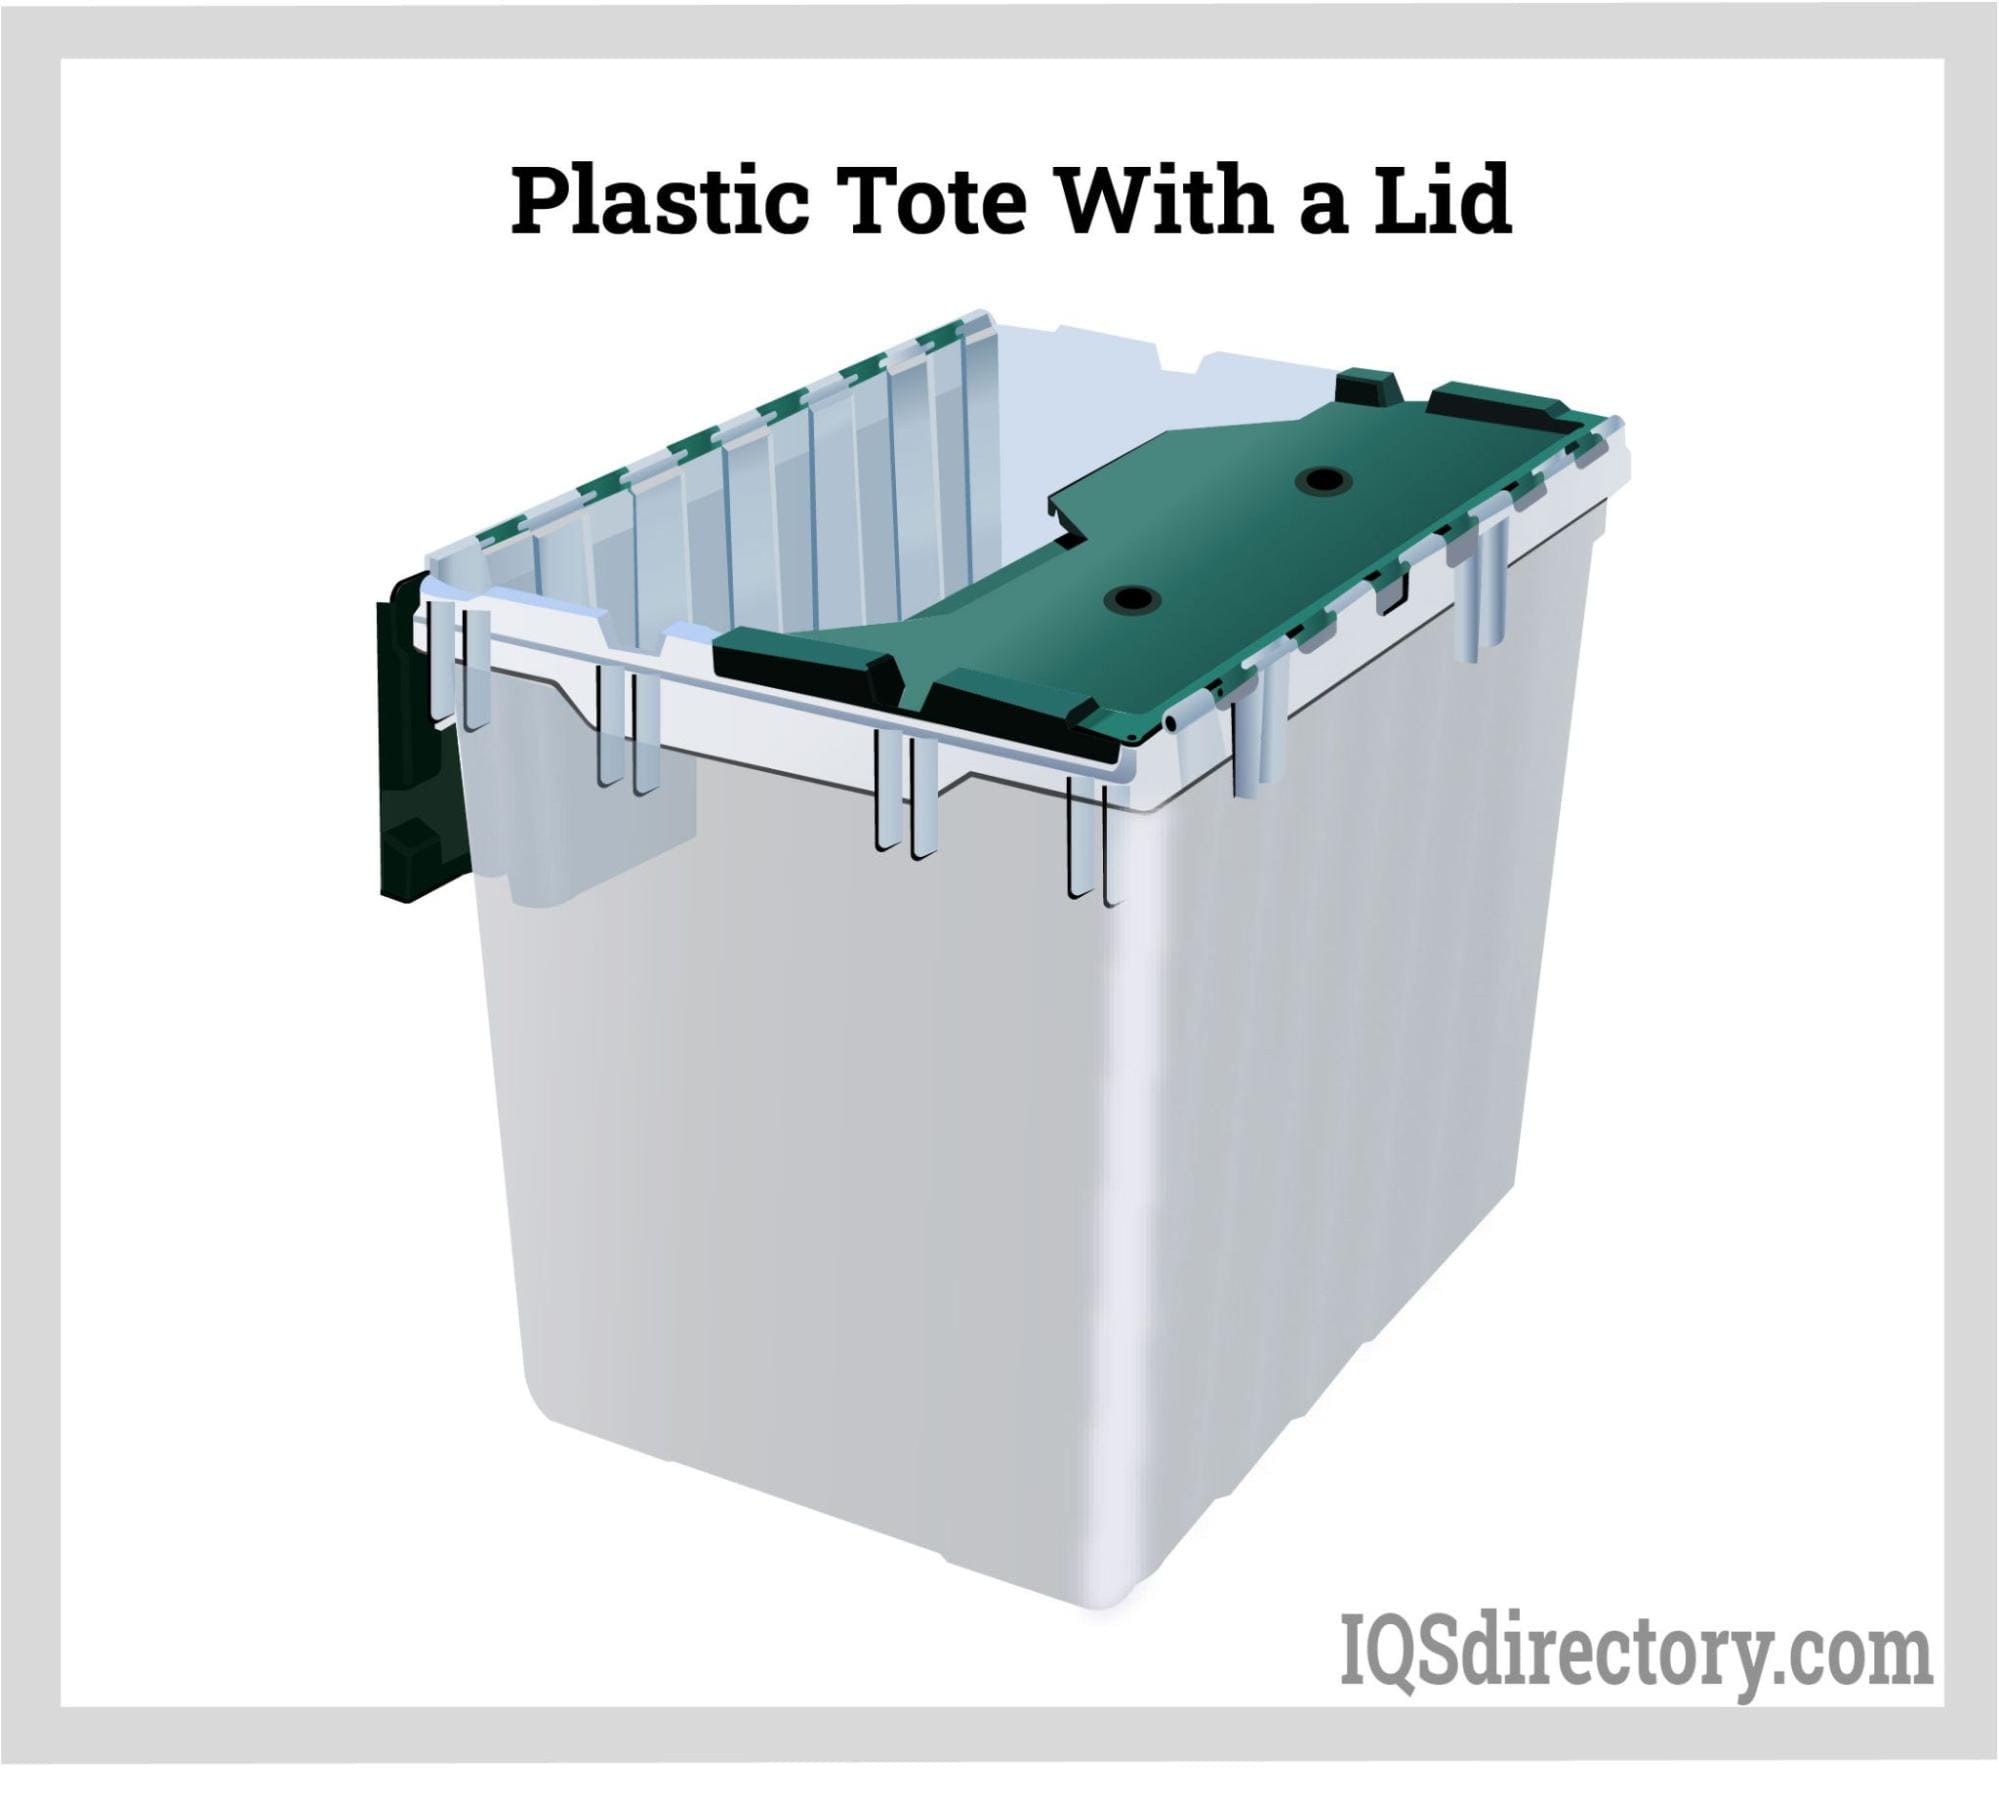 large collapsible plastic storage bins wholesale & Factory Price